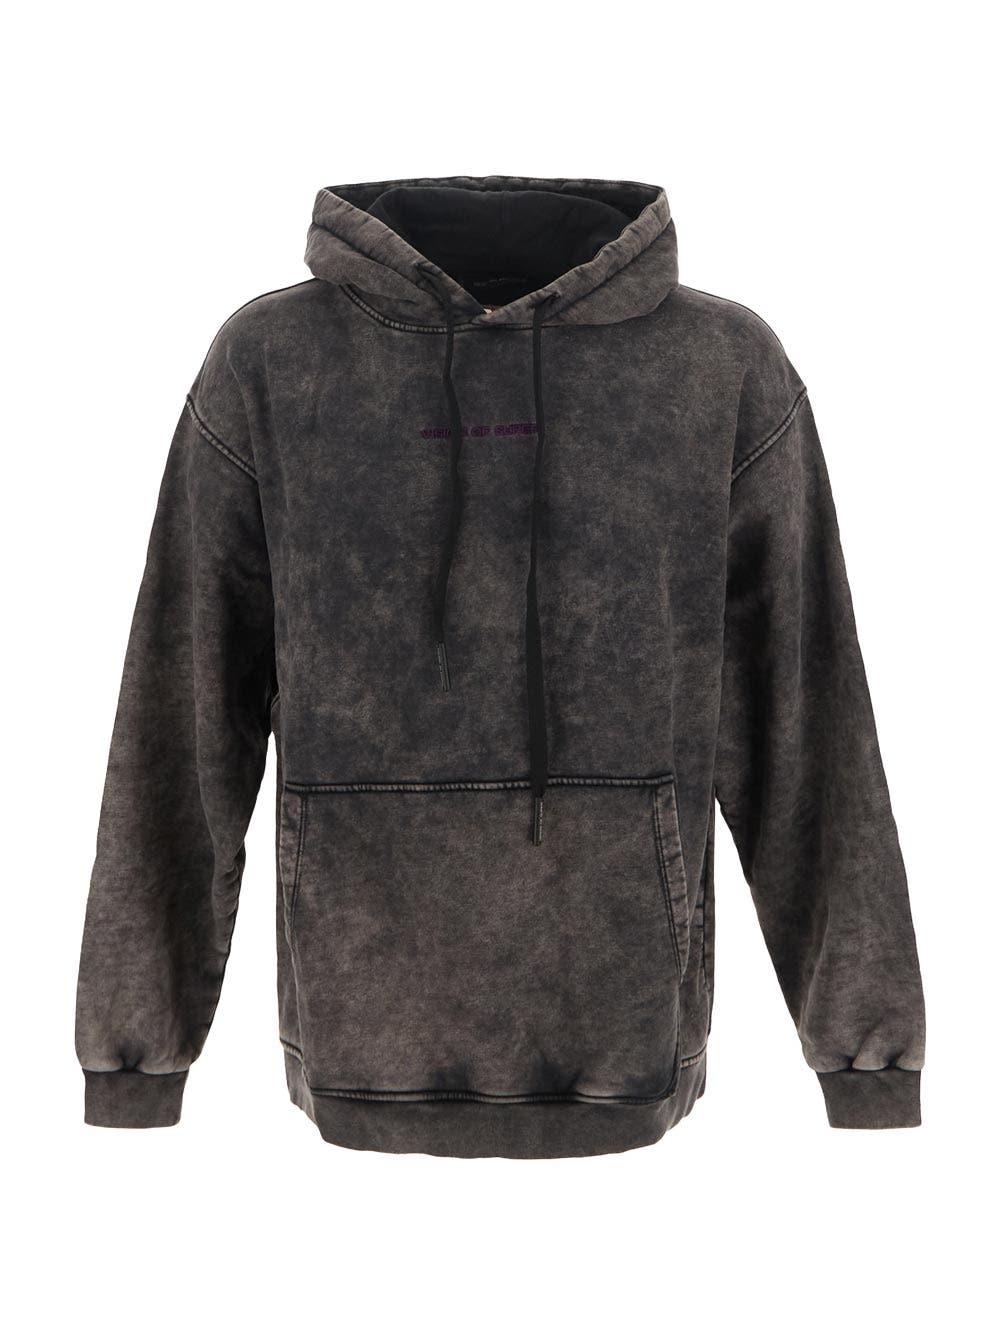 Vision of Super Grey Washed-out Hoodie